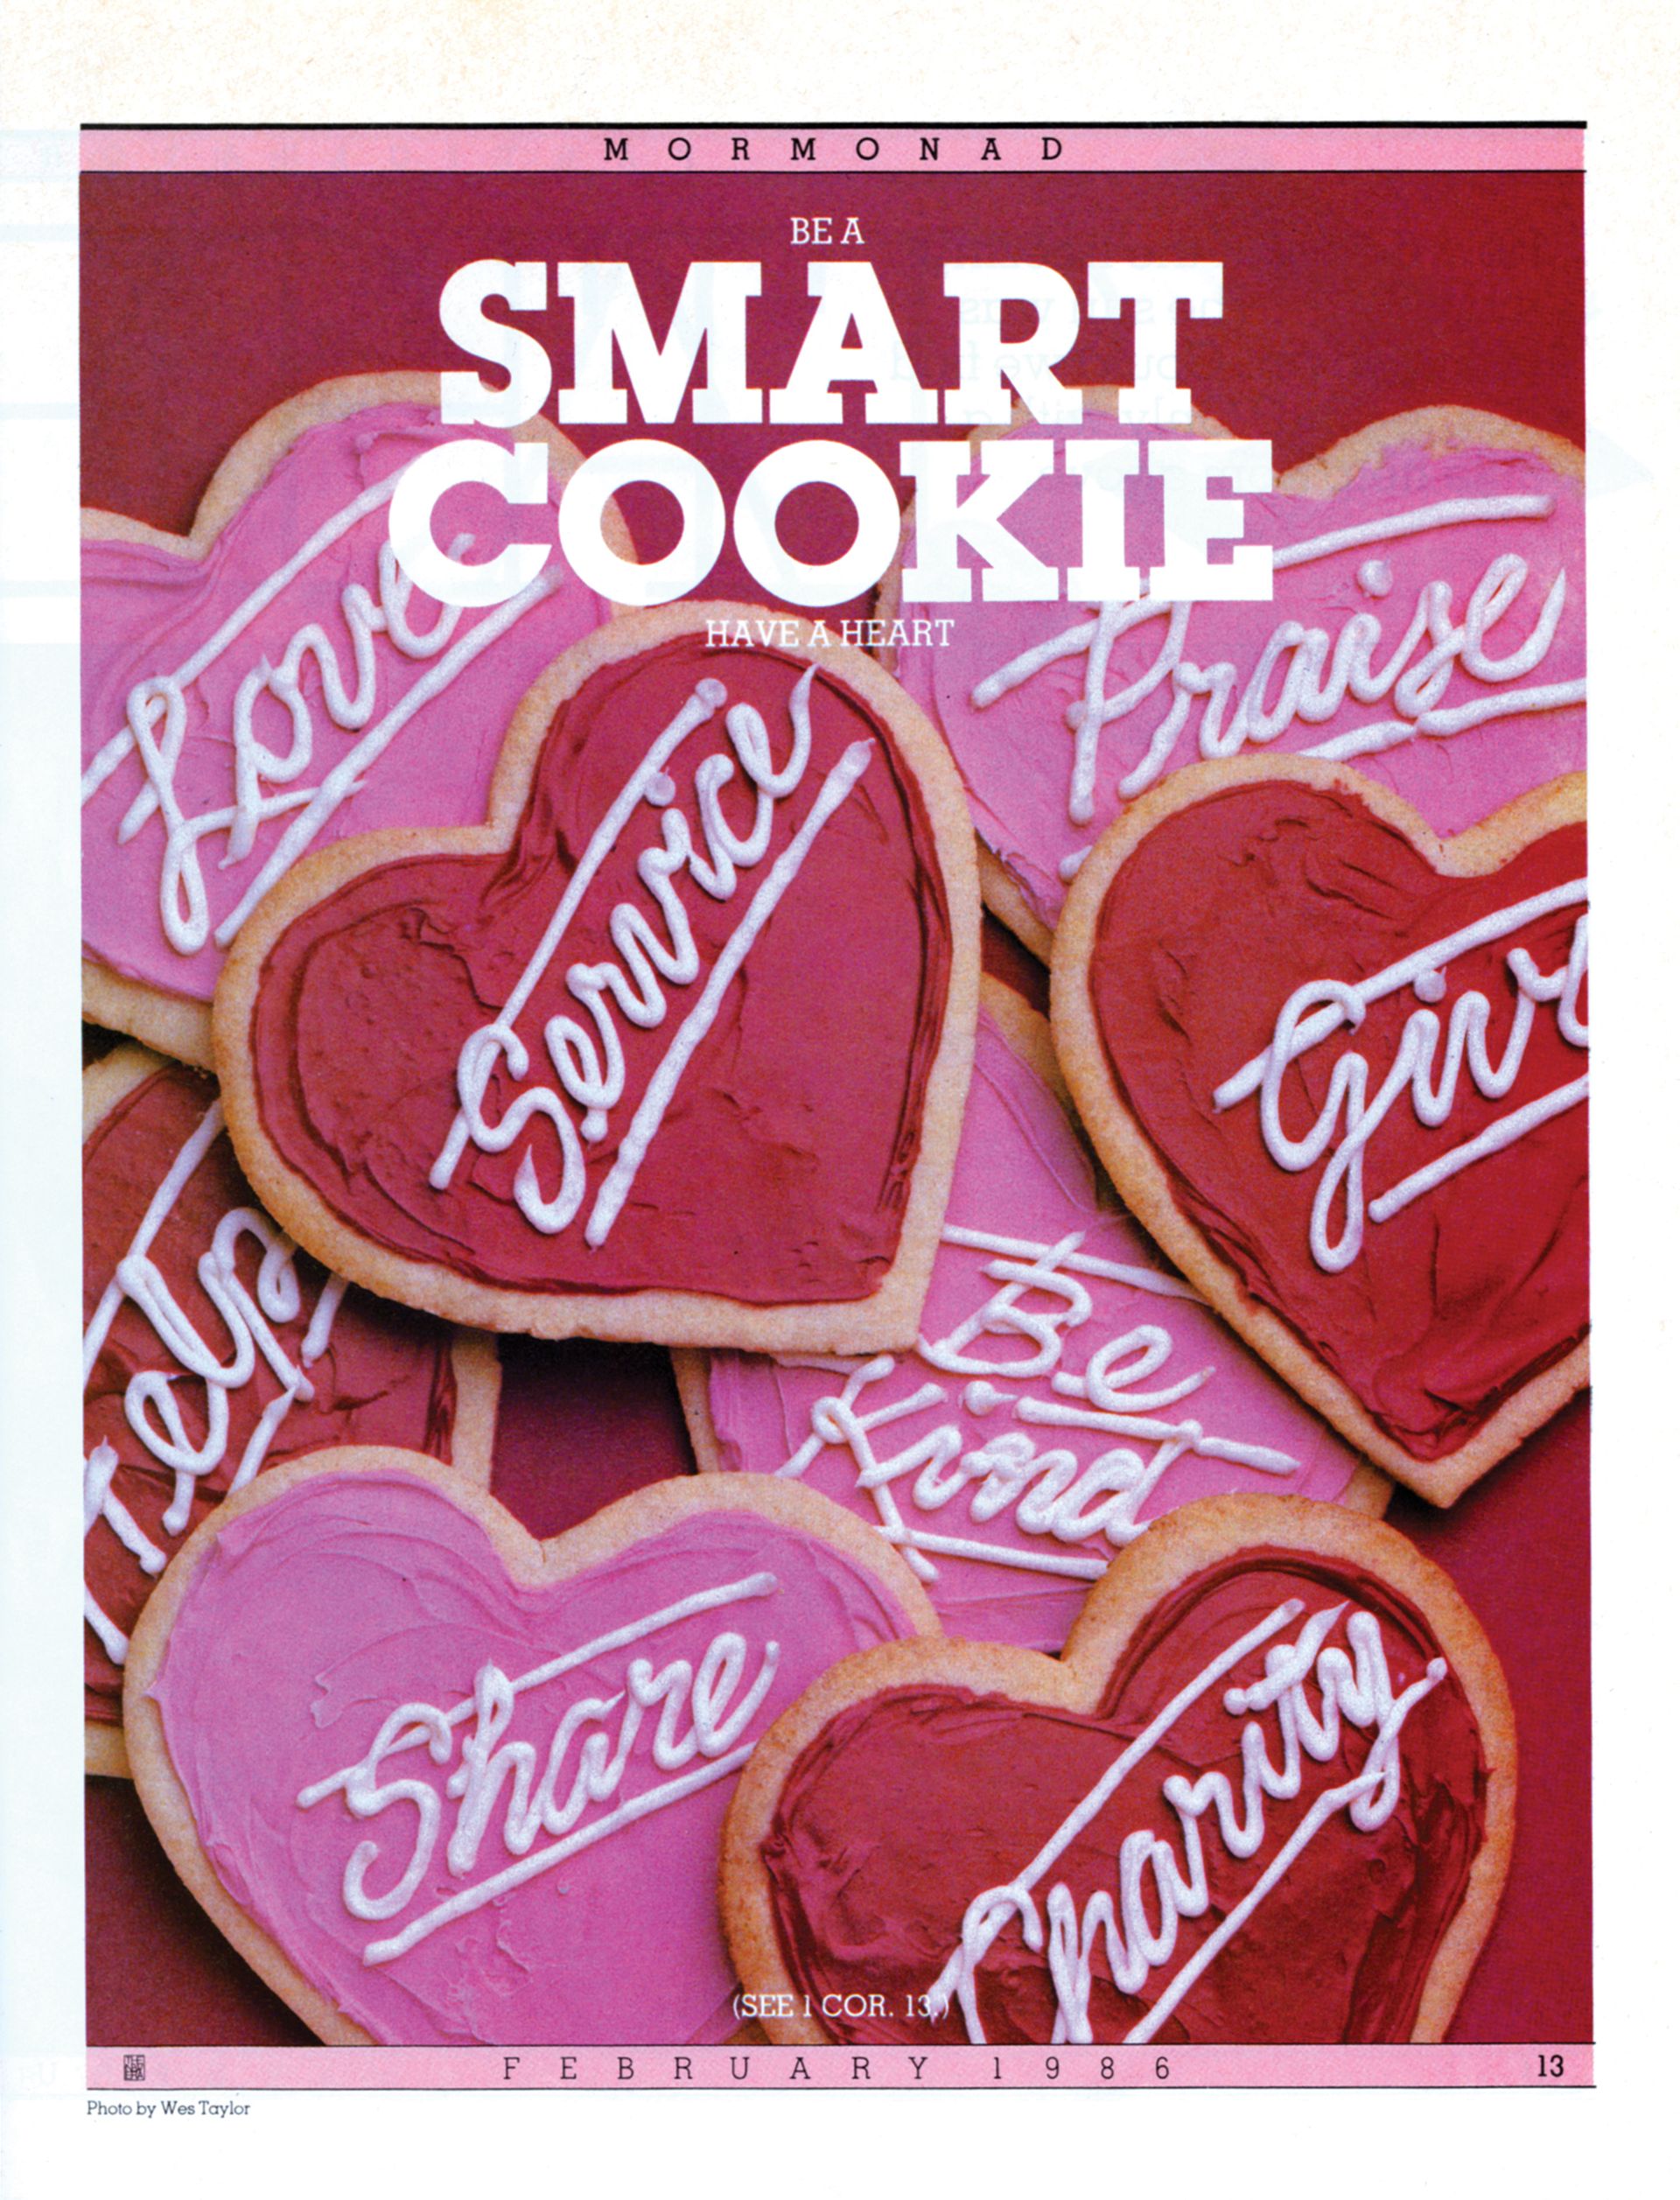 Be a Smart Cookie. Have a heart. Feb. 1986 © undefined ipCode 1.